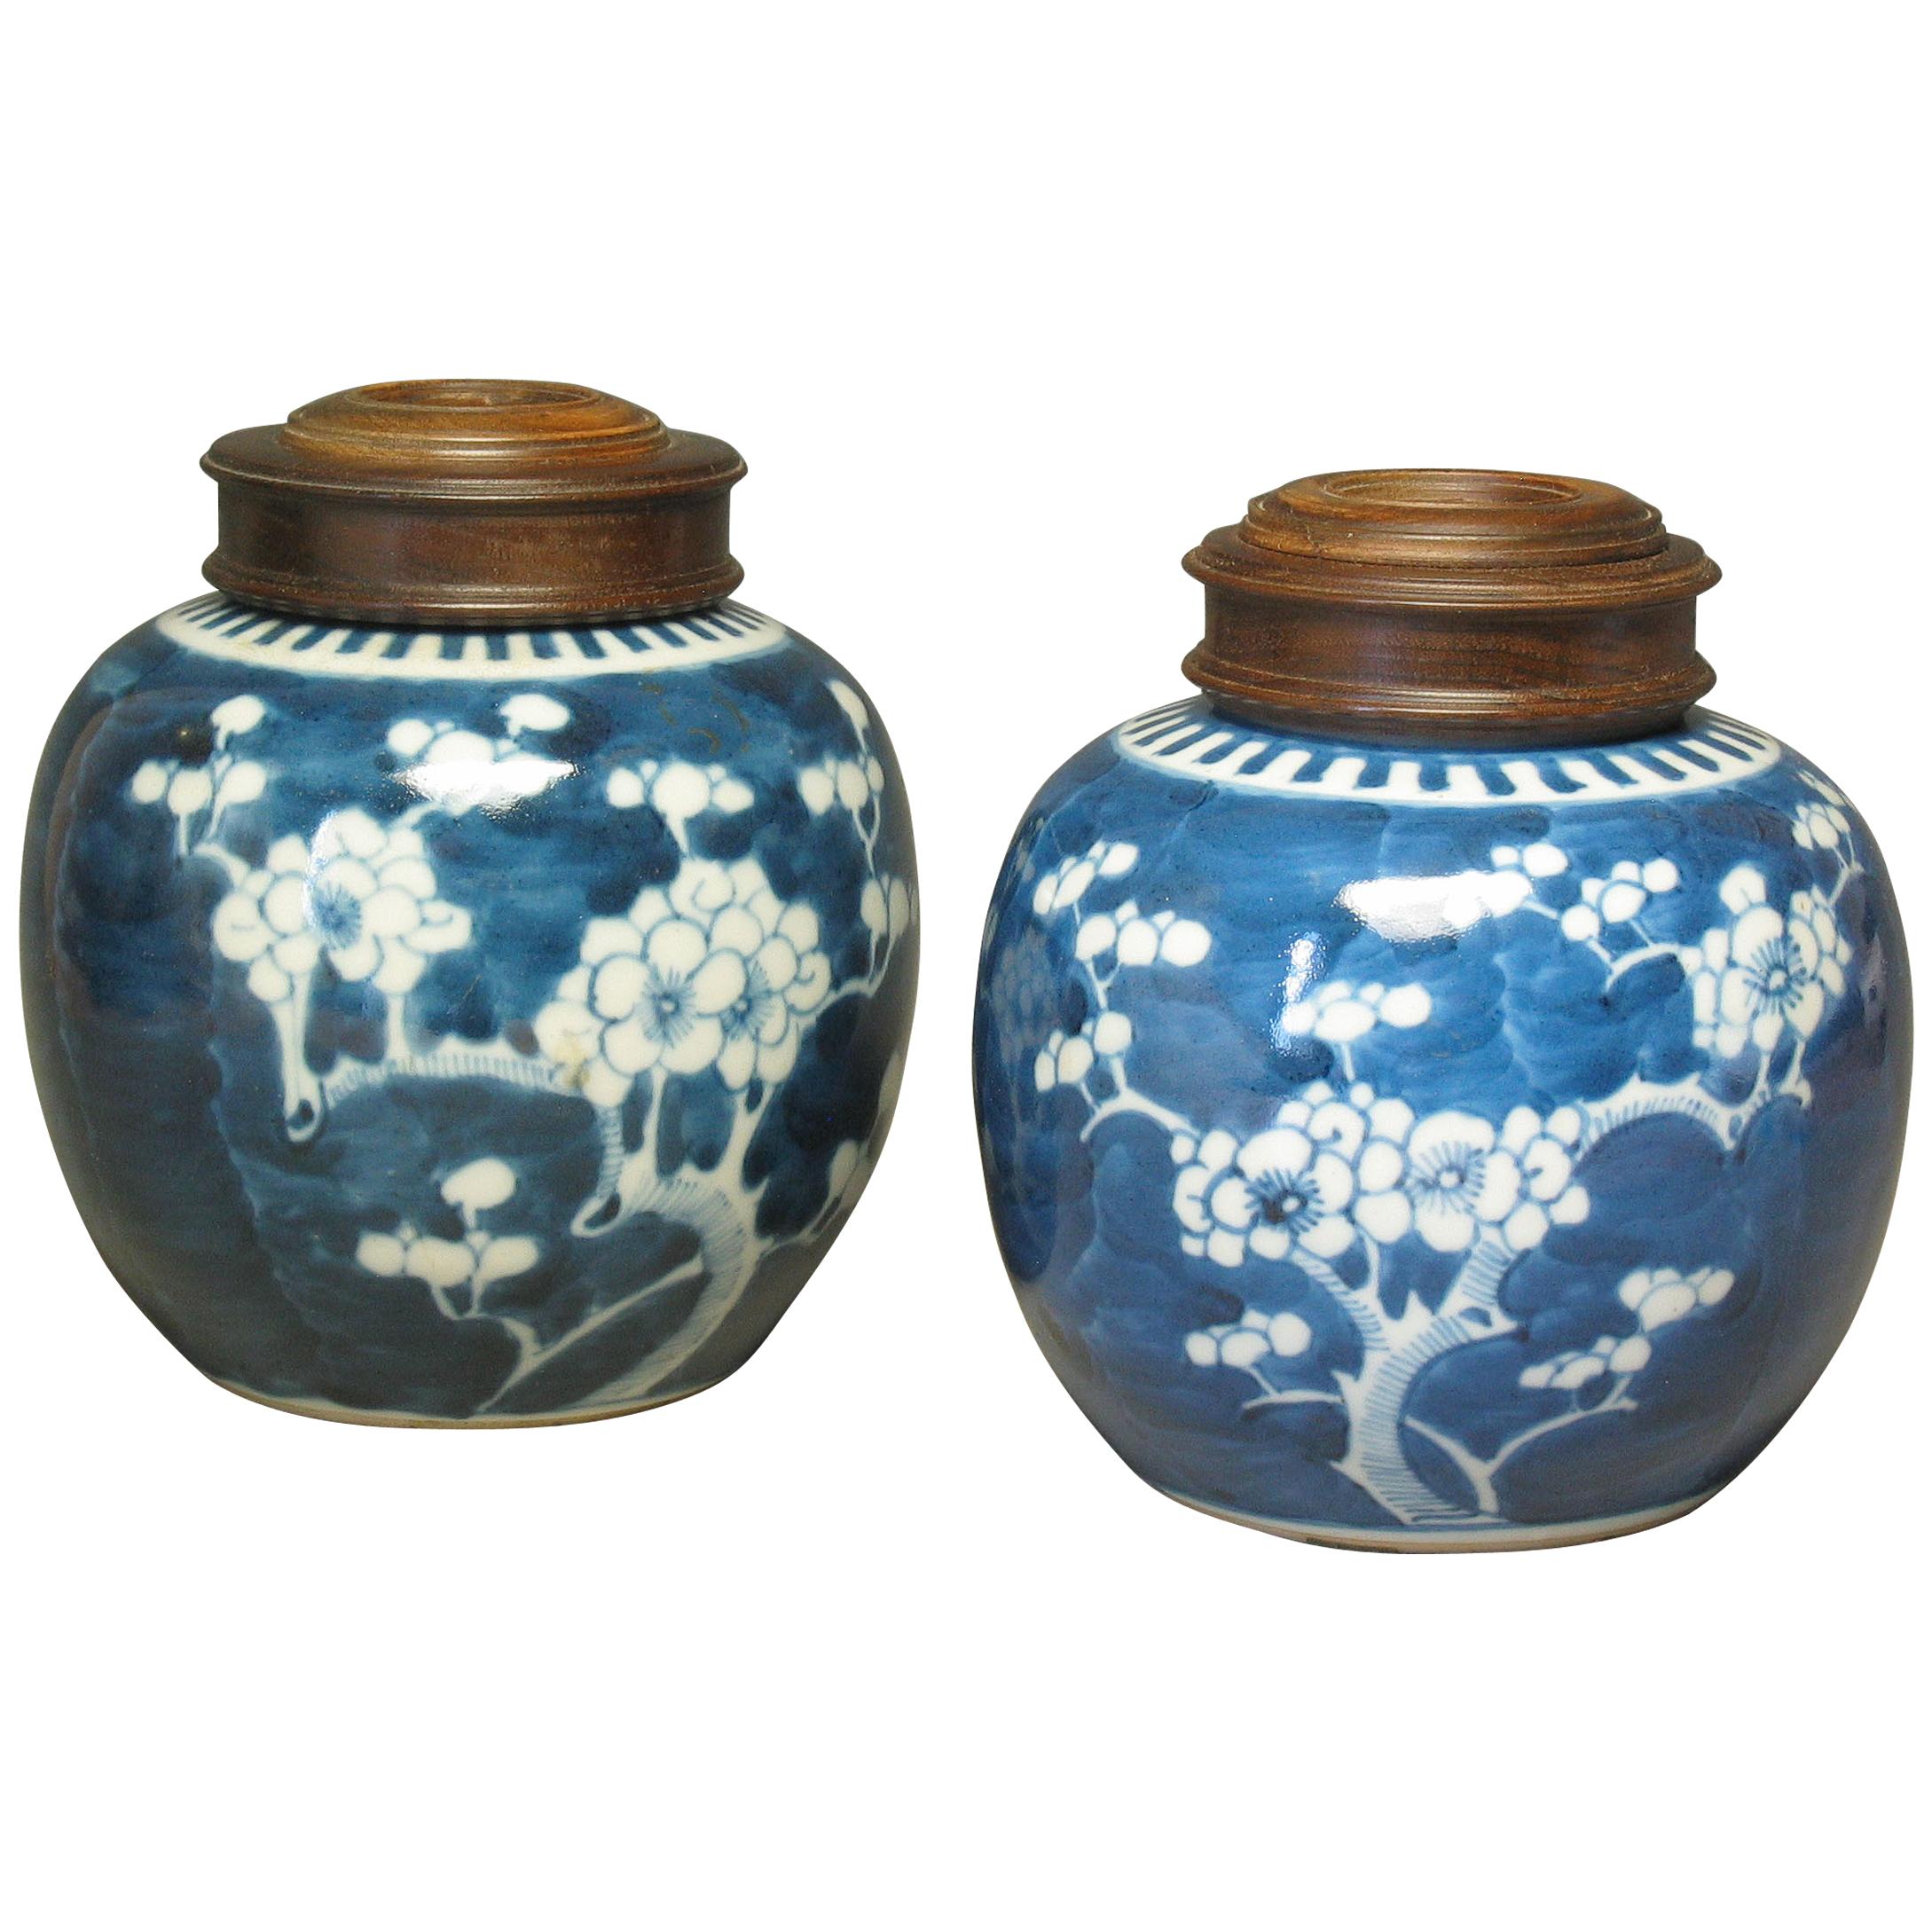 Two Chinese Blue and White Prunus Globular Jars Late Qing Dynasty